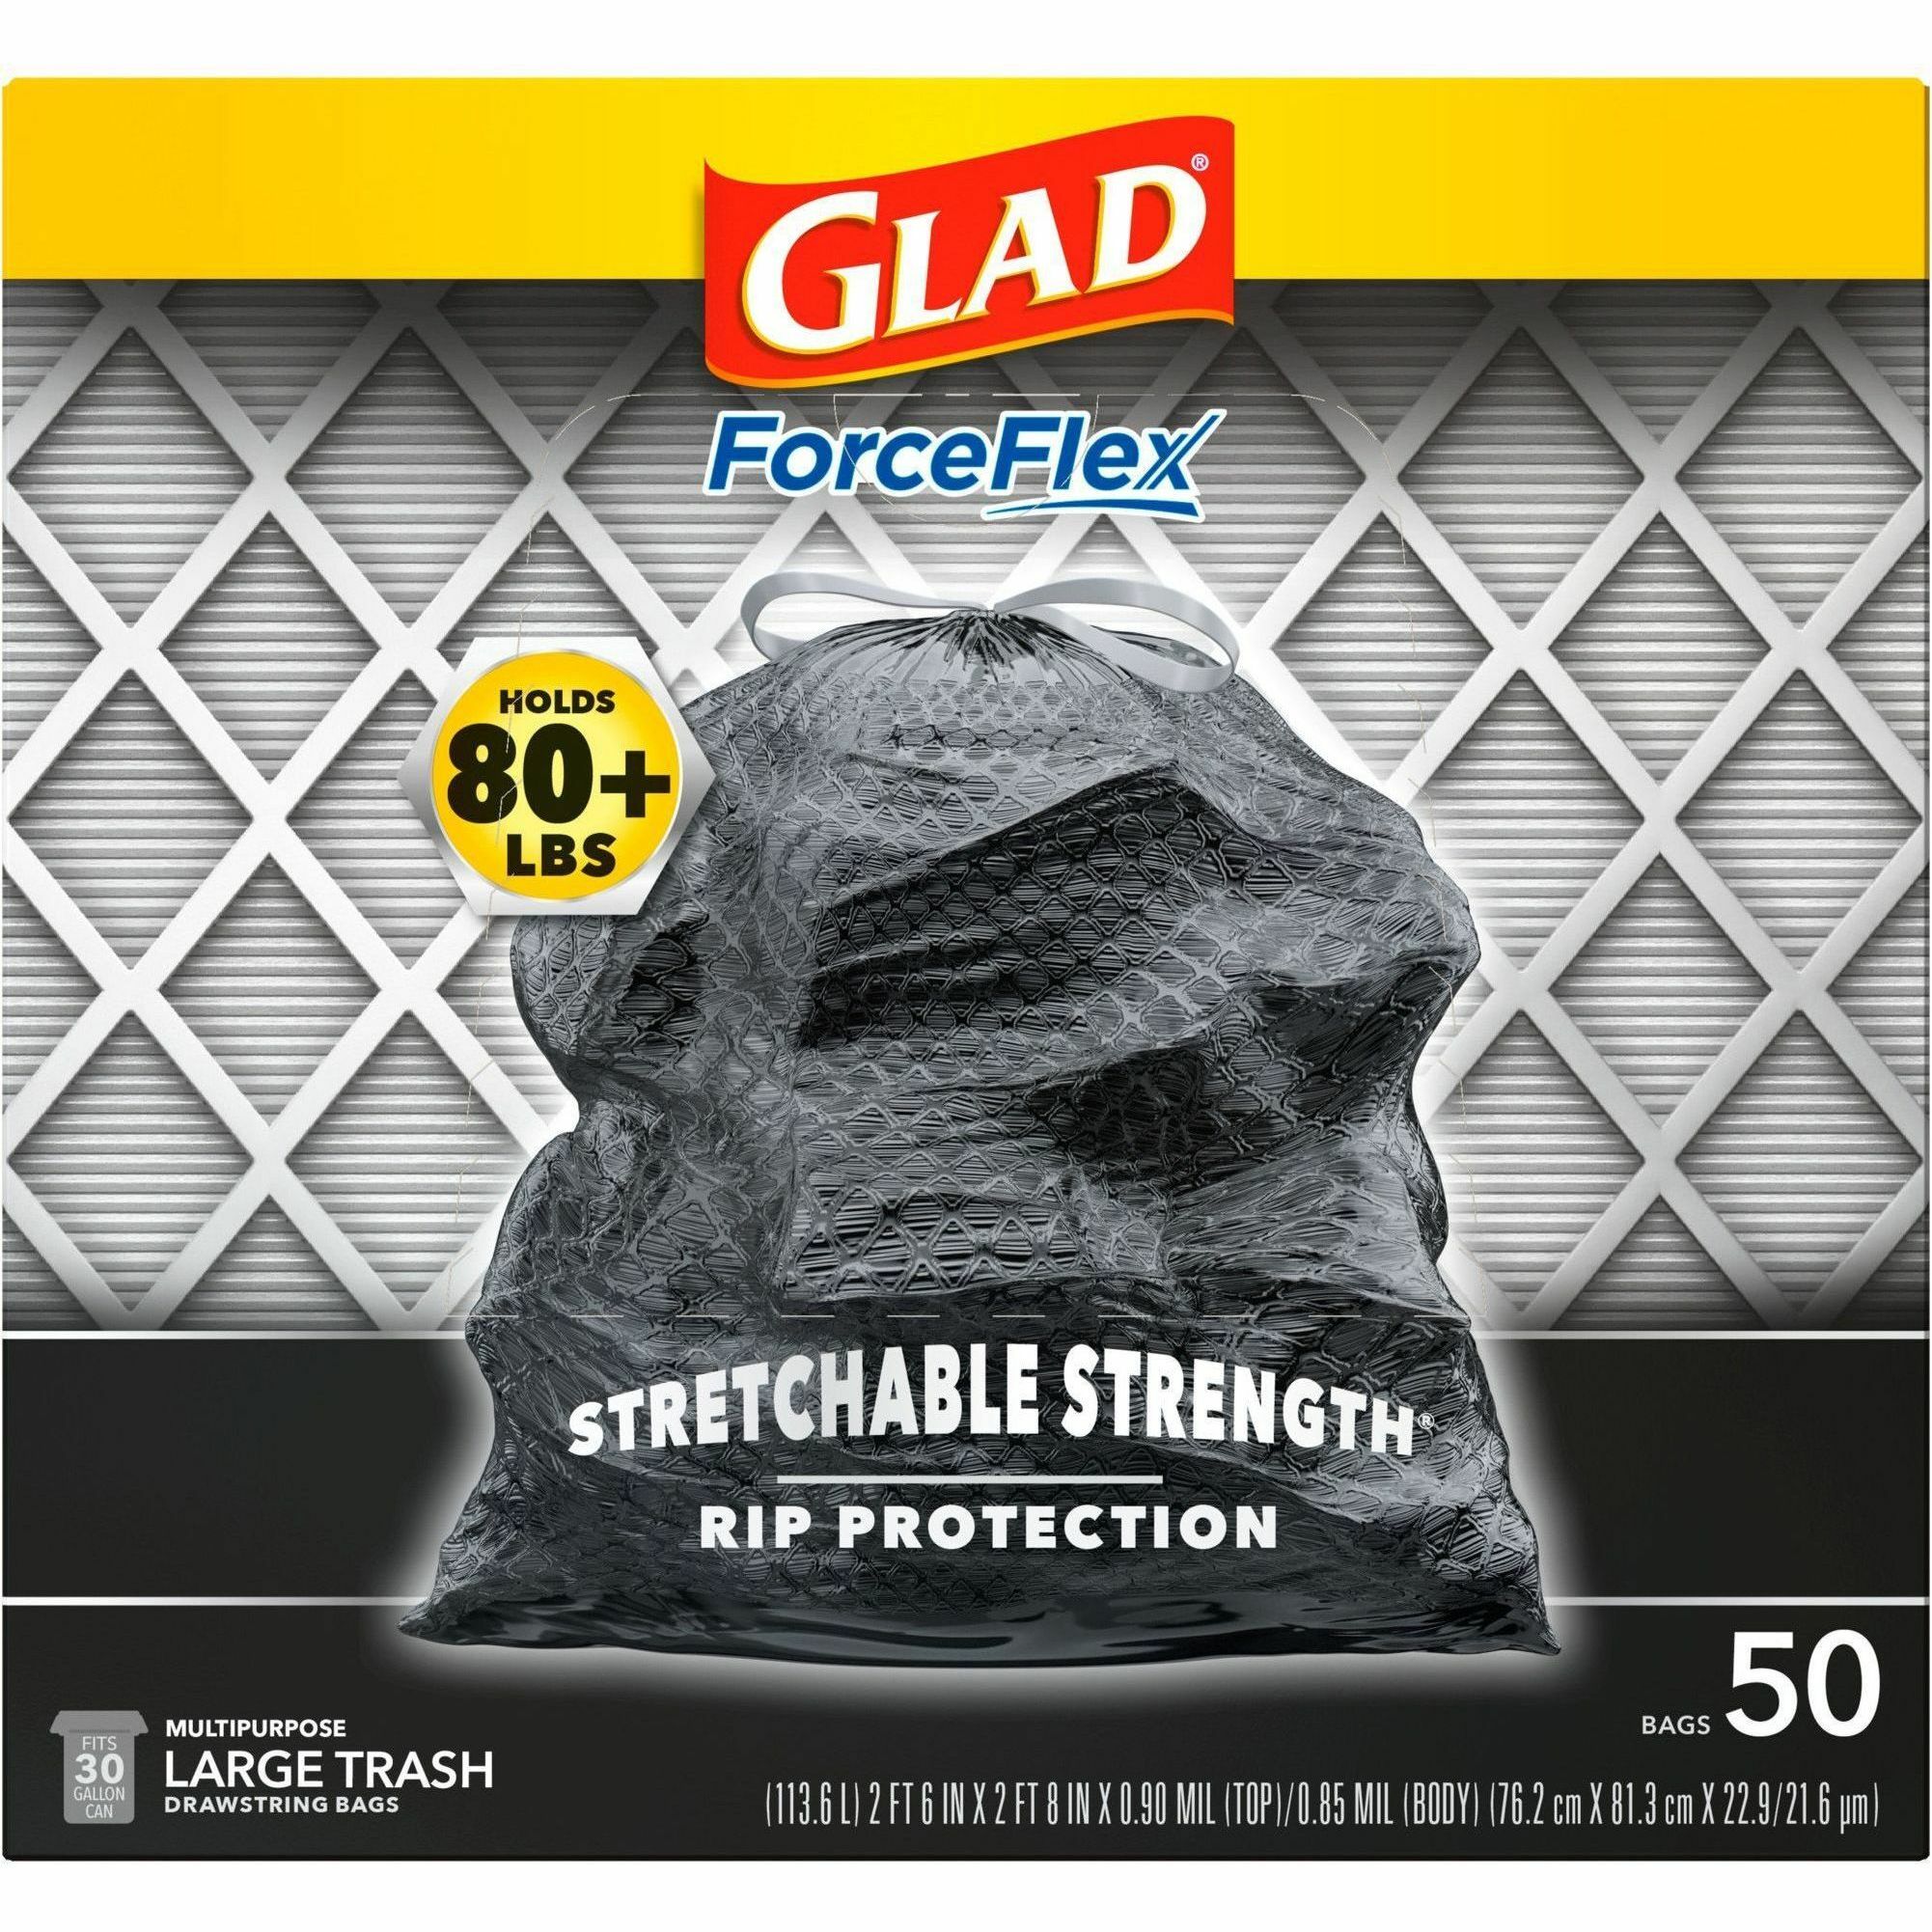 Pack of 25 Clear Trash Bags 38 x 58 Thickness 19 Micron High